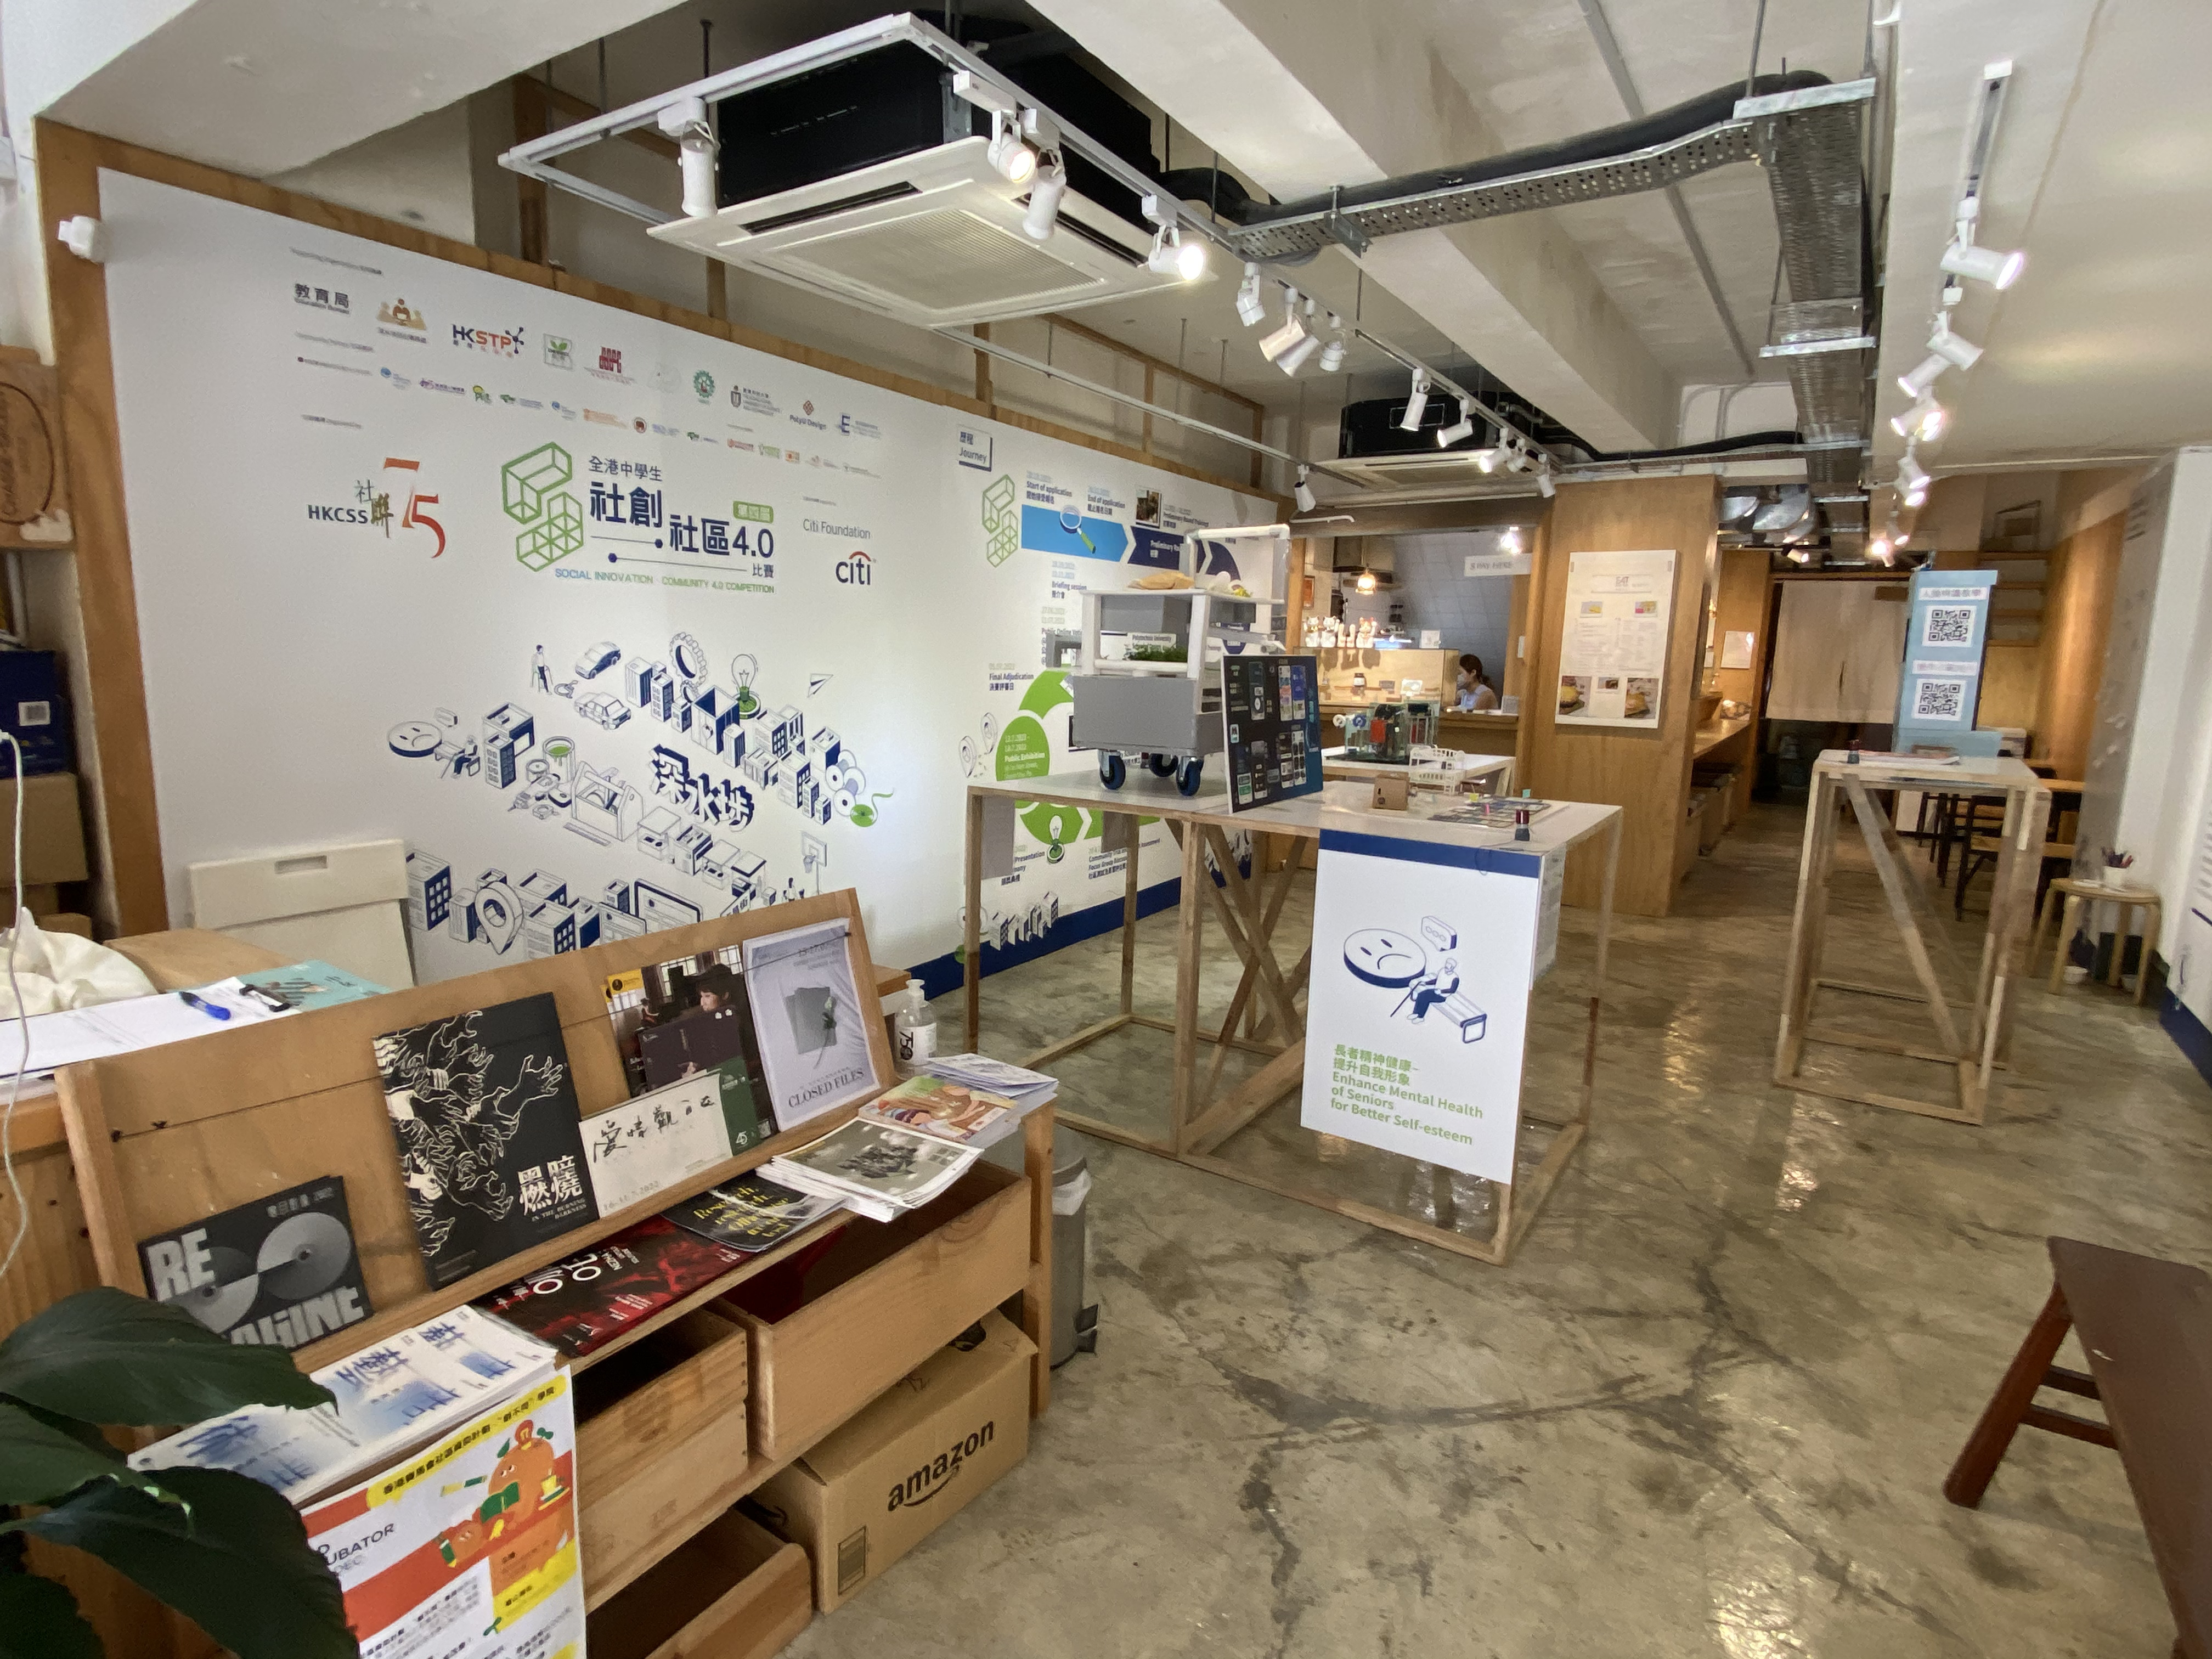 15 prototypes and 44 concept boards are now being exhibited to the public at Form Society and Parallel Space on Tai Nam Street until July 18.